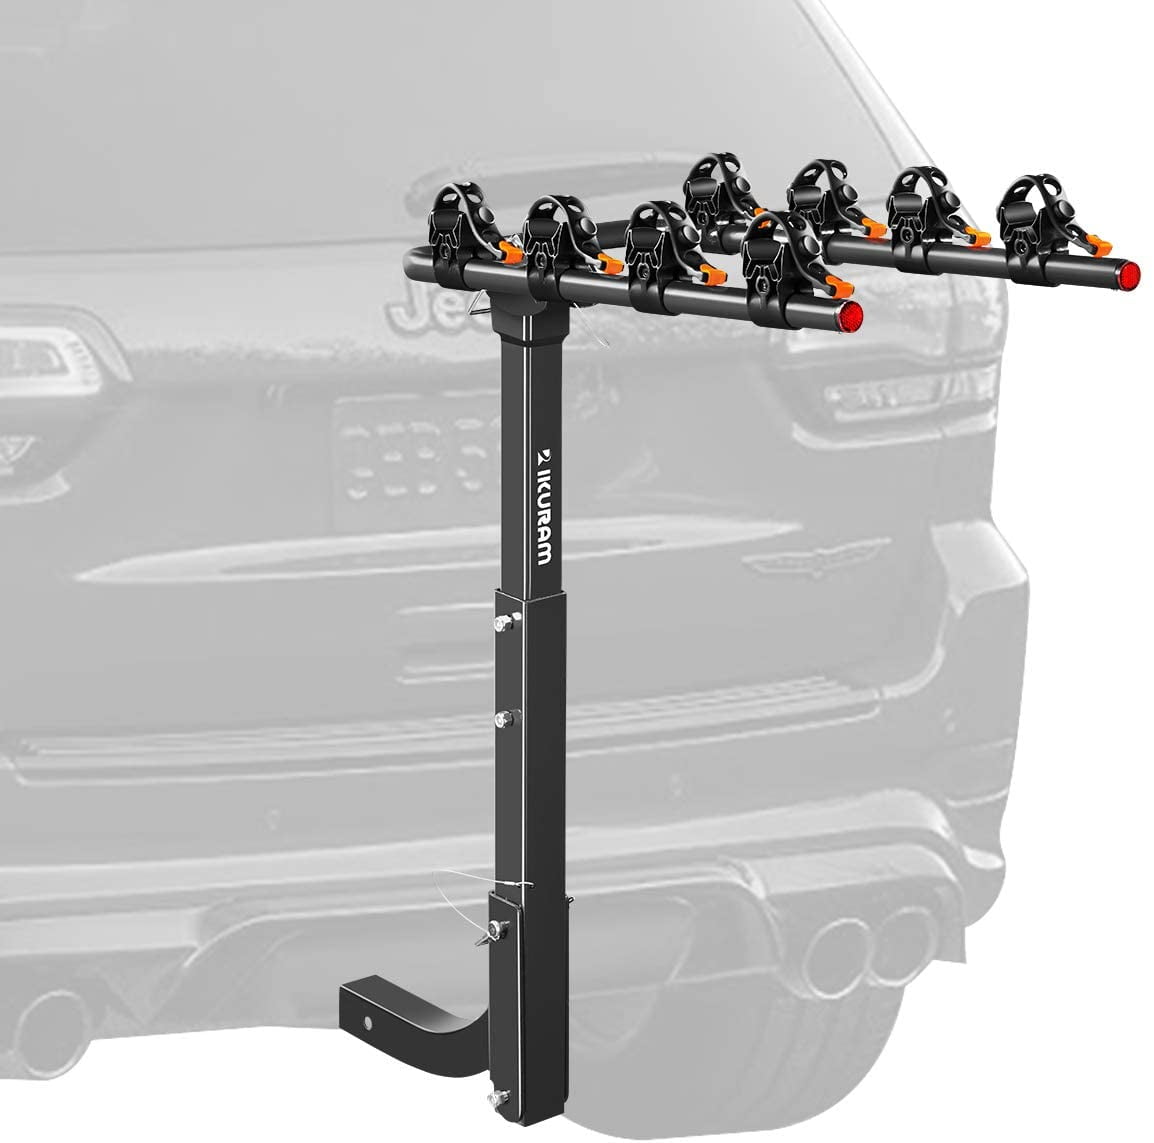 X-BULL 4-Bike Carrier Rack Hitch Mount Heavy Bicycle Foldable W/2" Receiver SUV 